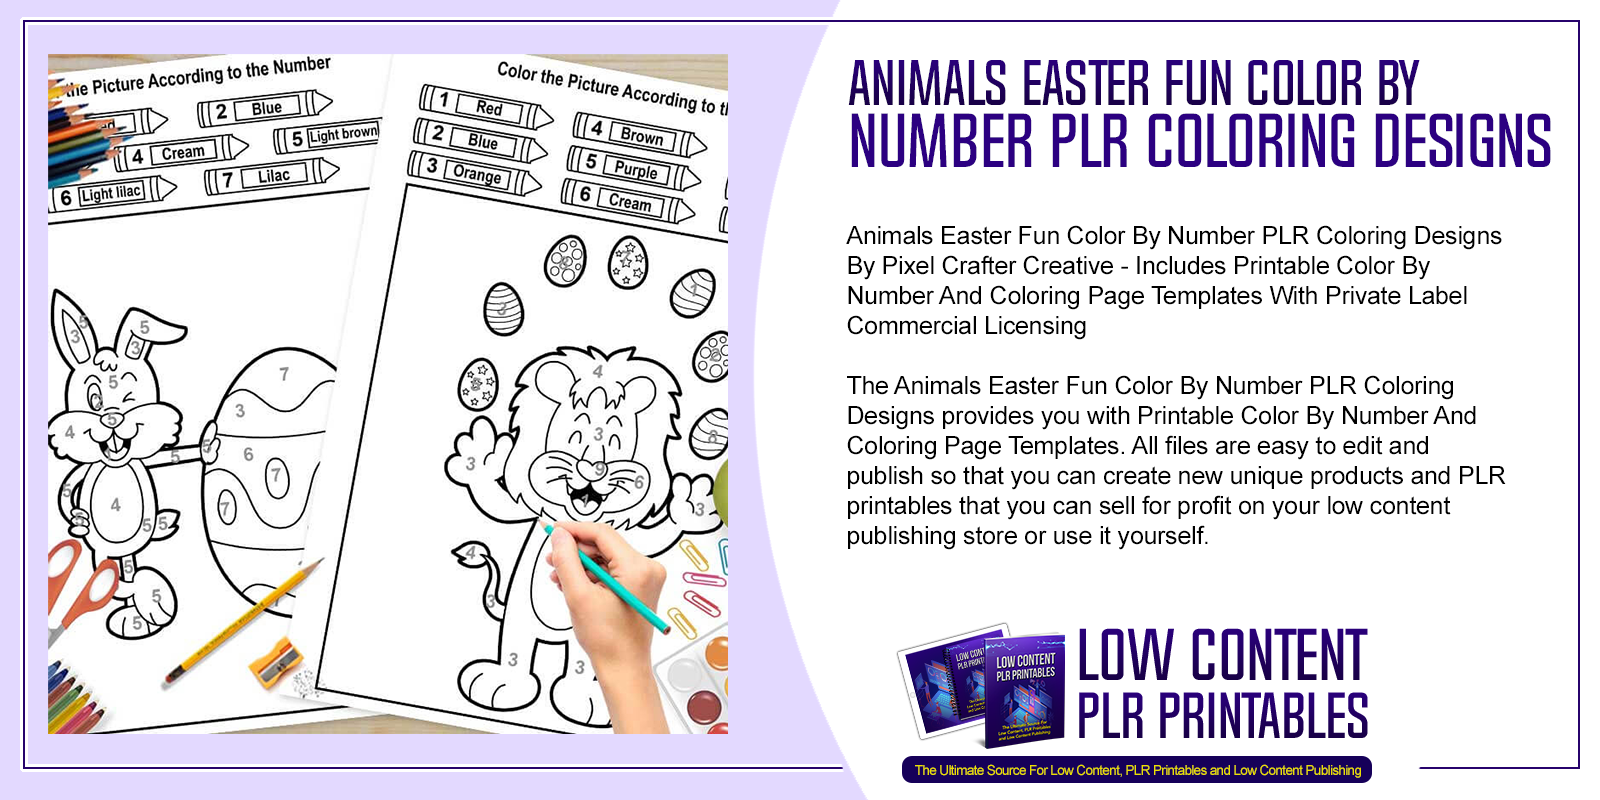 Animals Easter Fun Color By Number PLR Coloring Designs